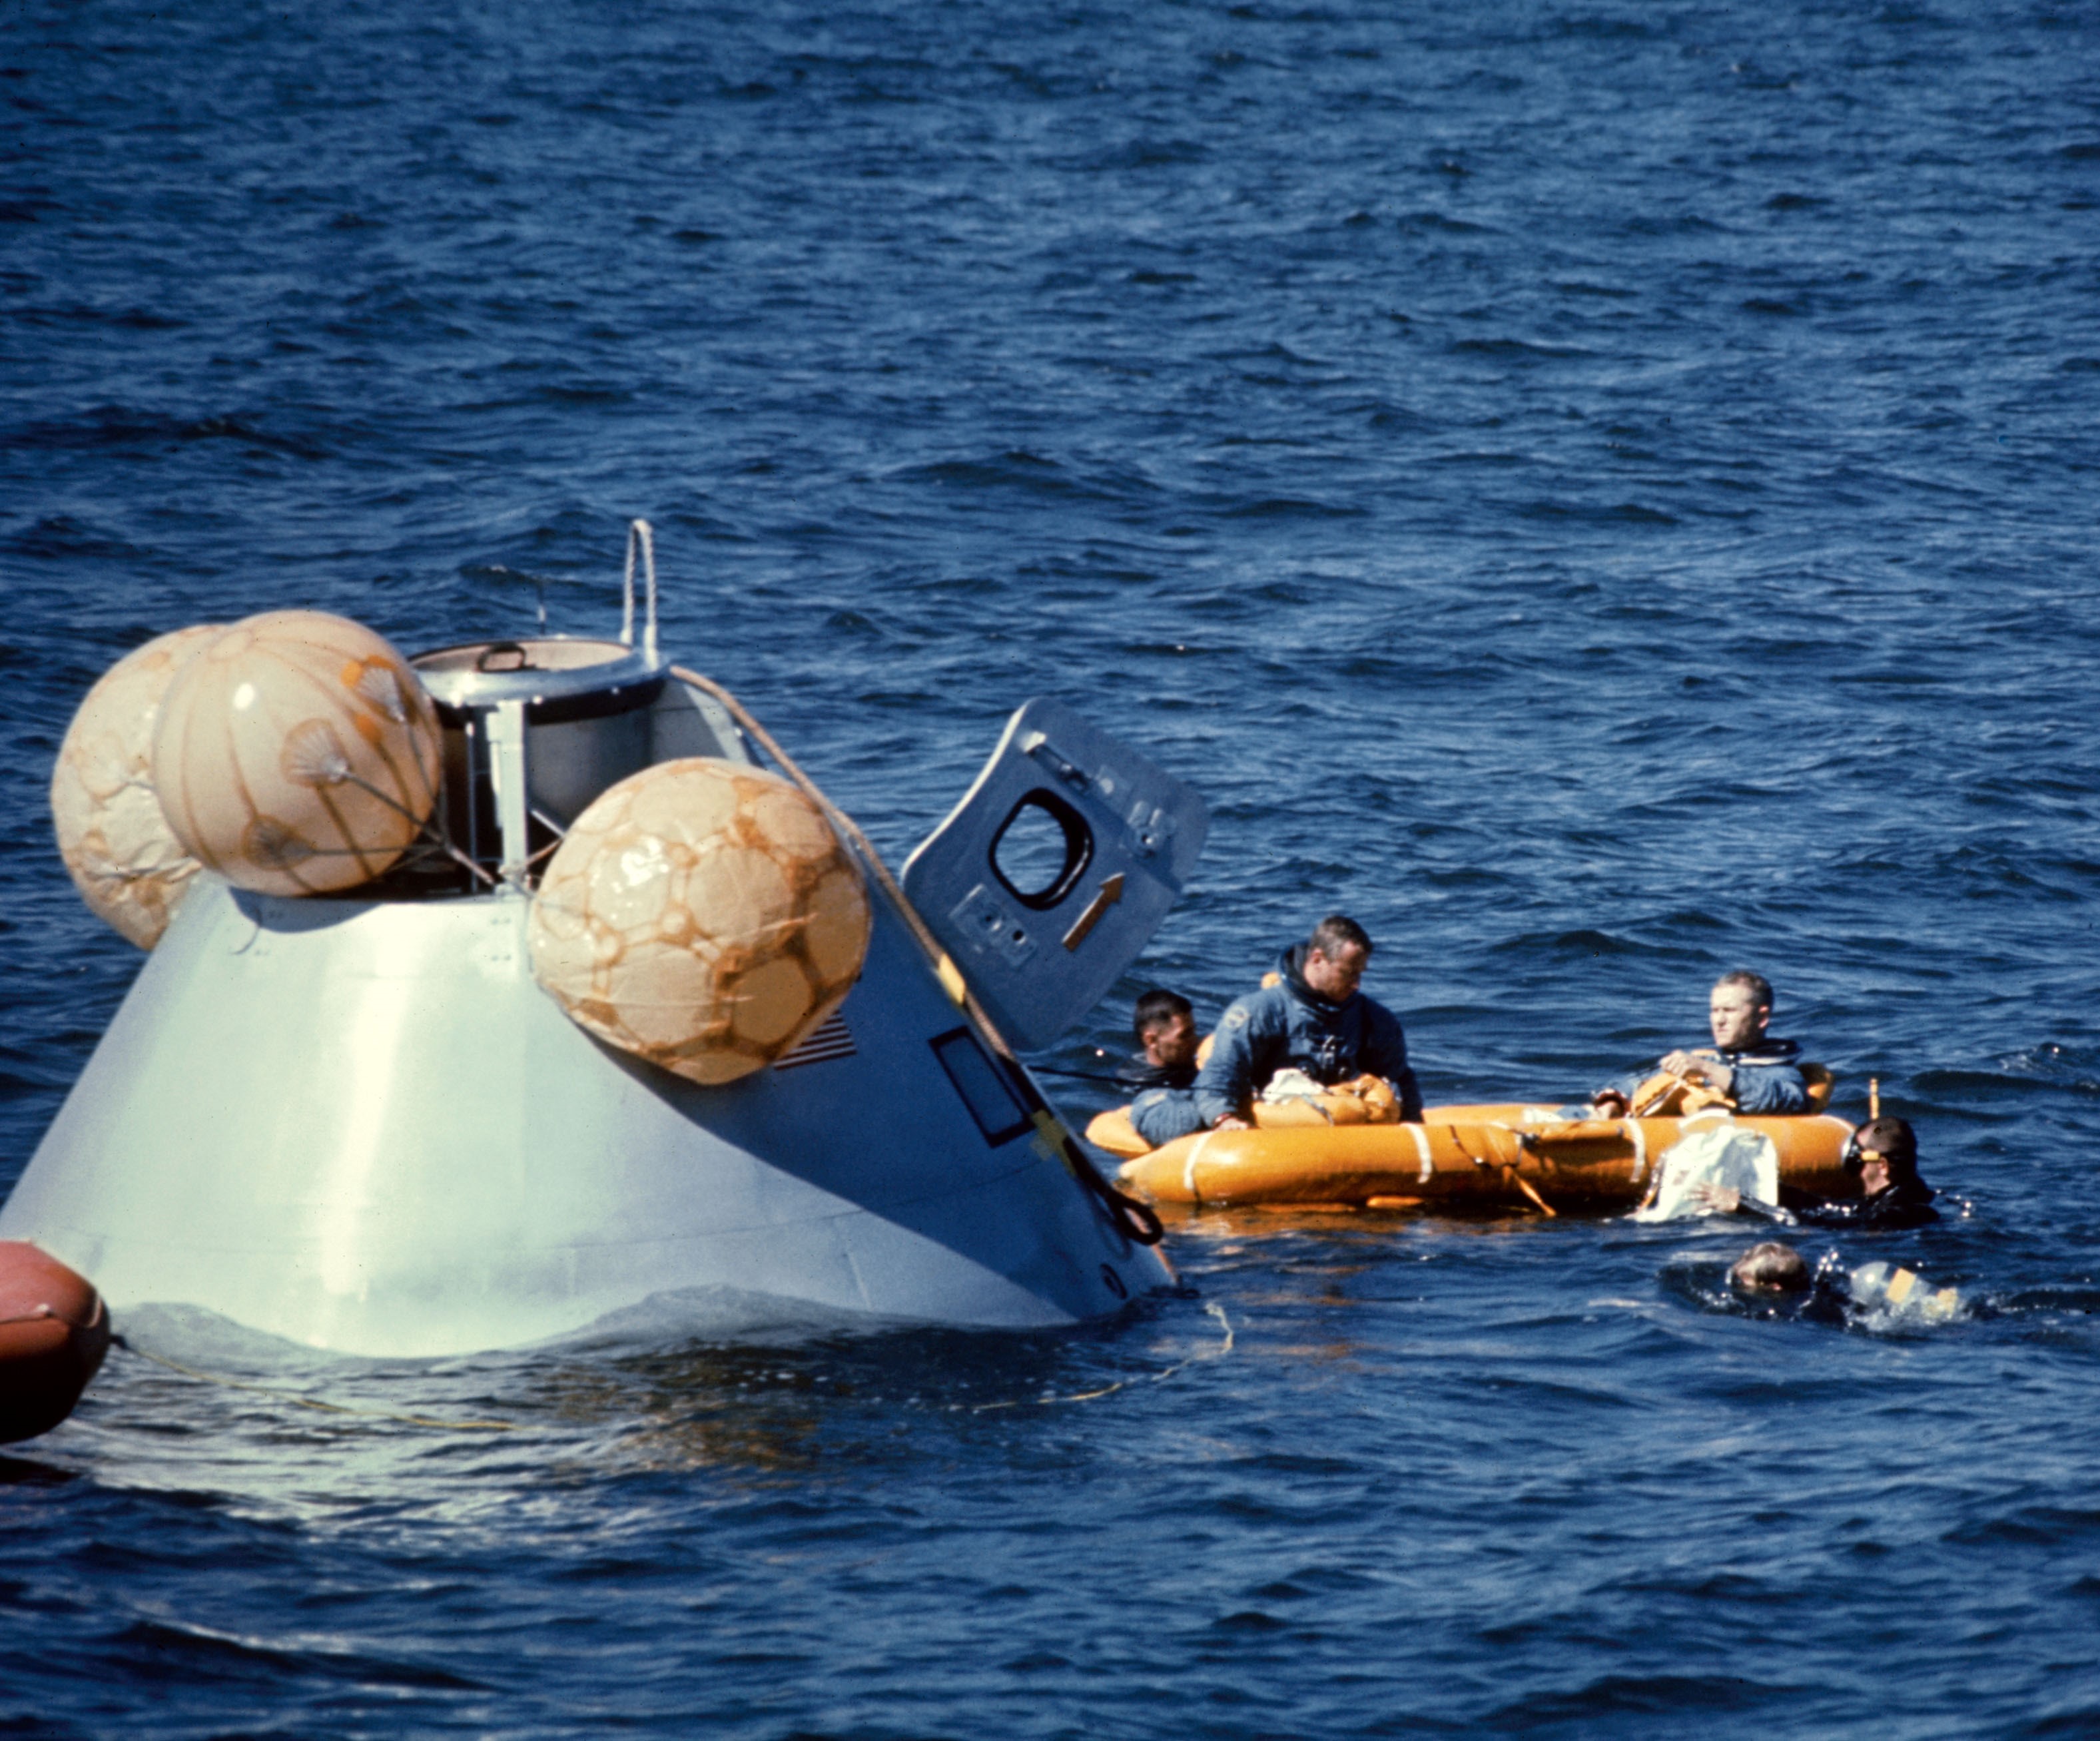 Anders, Lovell, and Borman in the life raft after egressing from their spacecraft